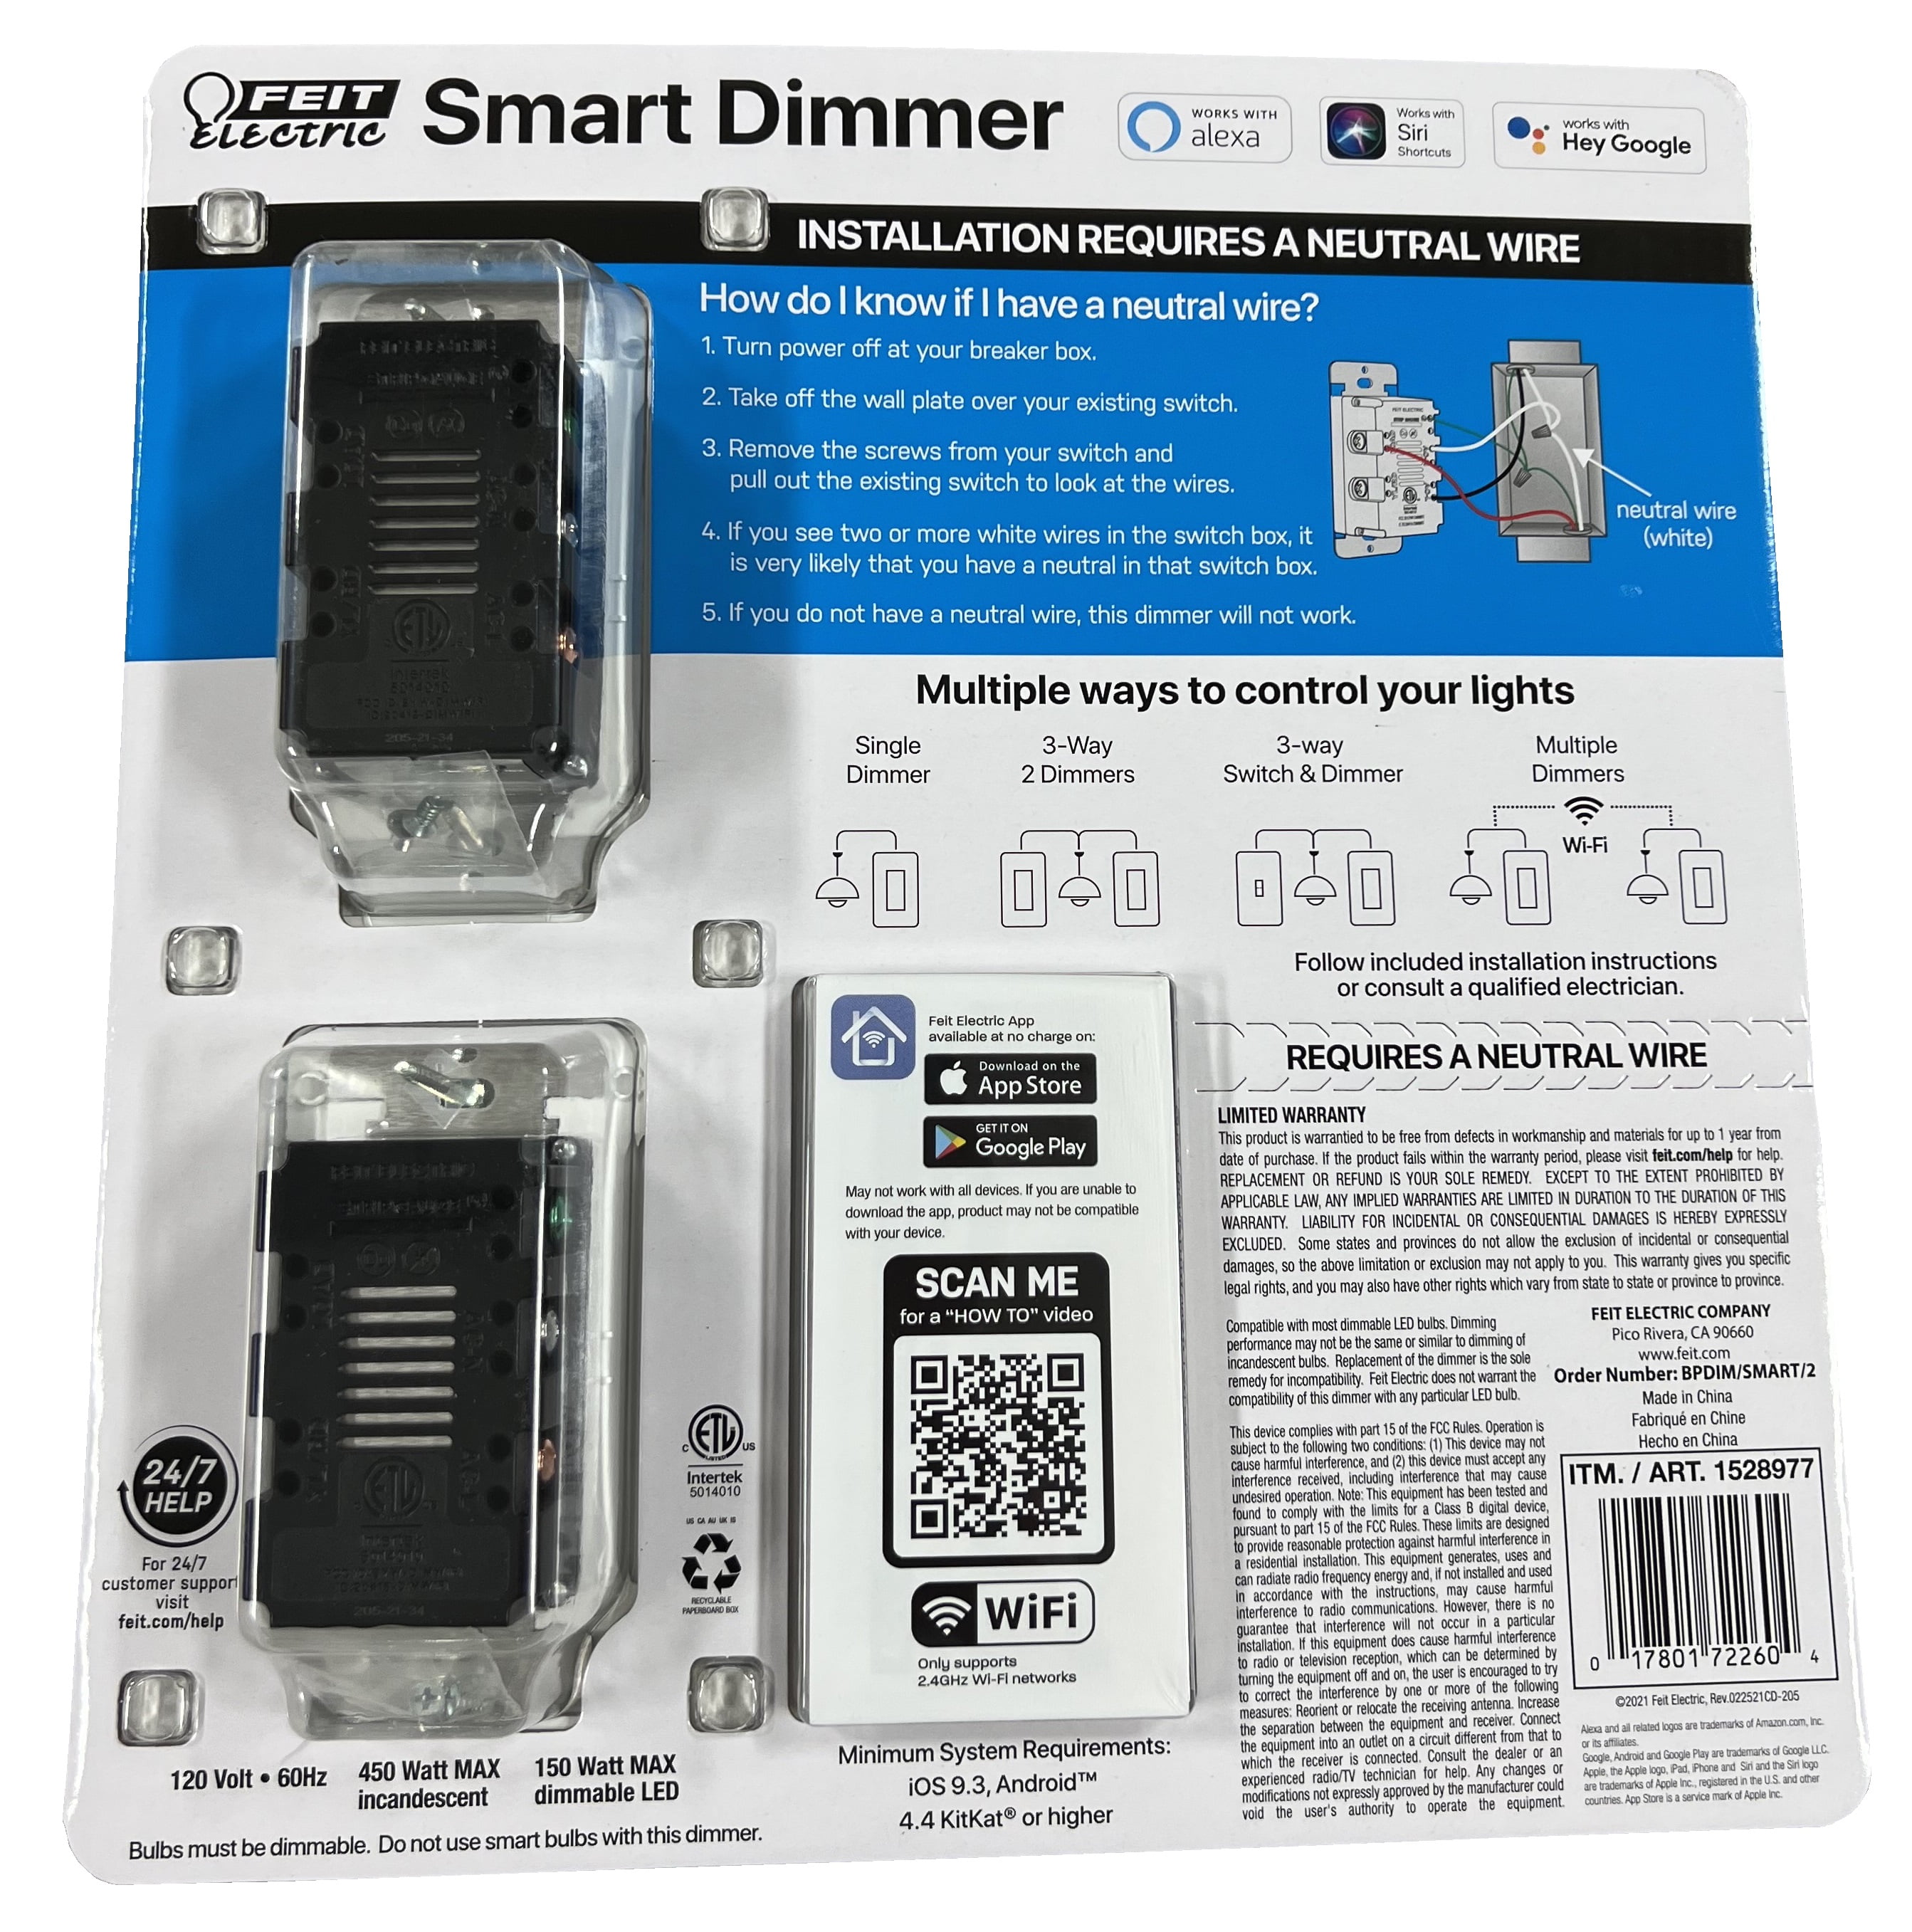 How to install and wire your Feit Electric smart dimmer – Feit Electric